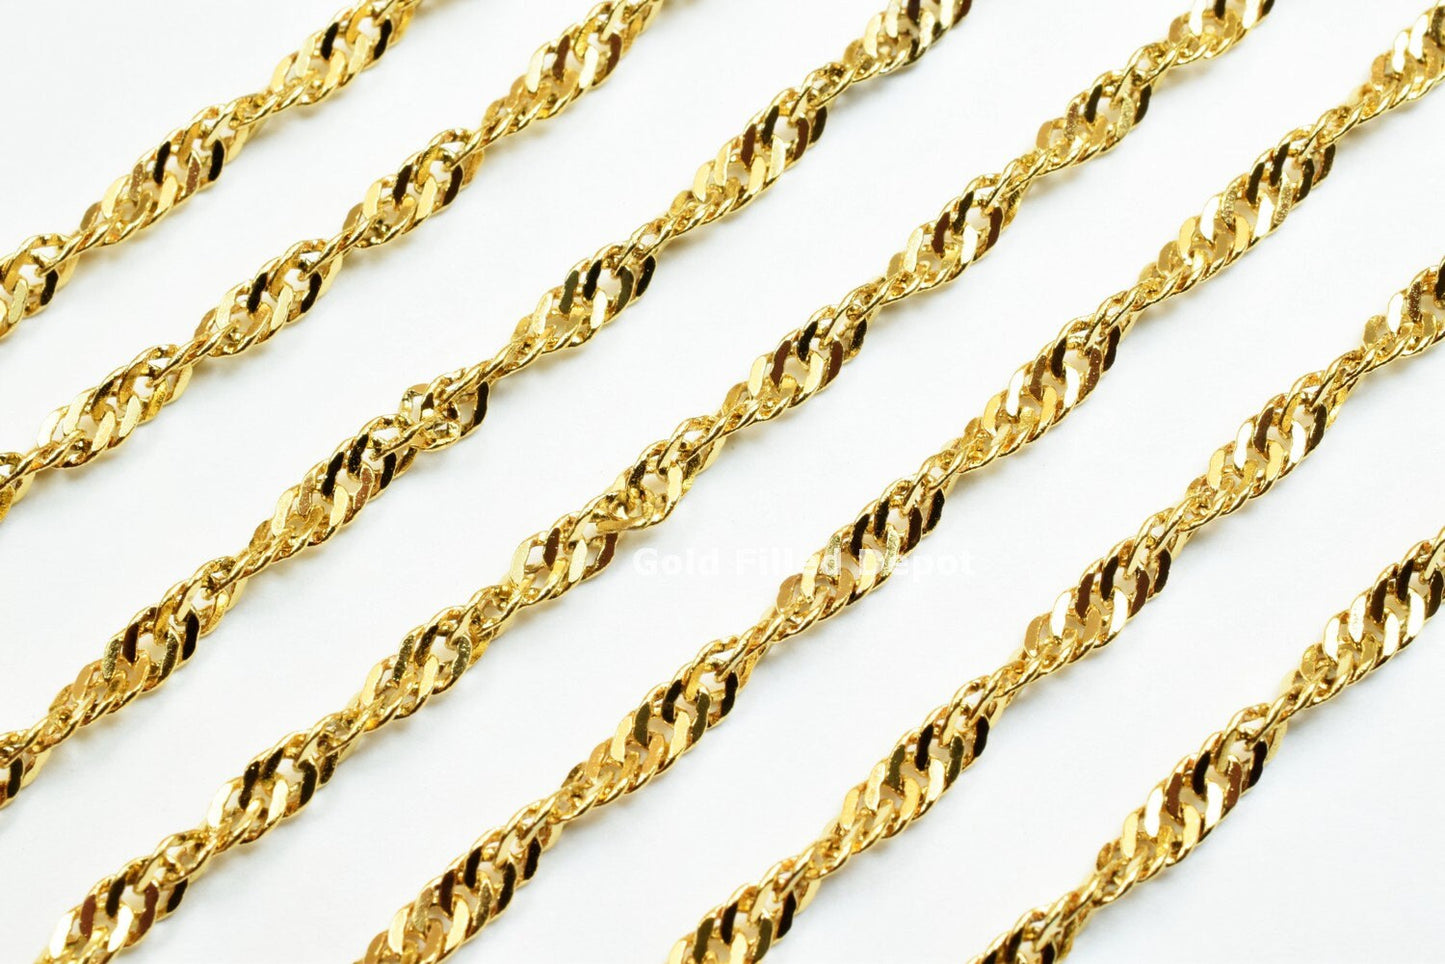 3 Foot 18K Gold Filled Flat Twist Snake Chain Size 2.8mm Gold Filled Findings Chain For Jewelry Making GFC009